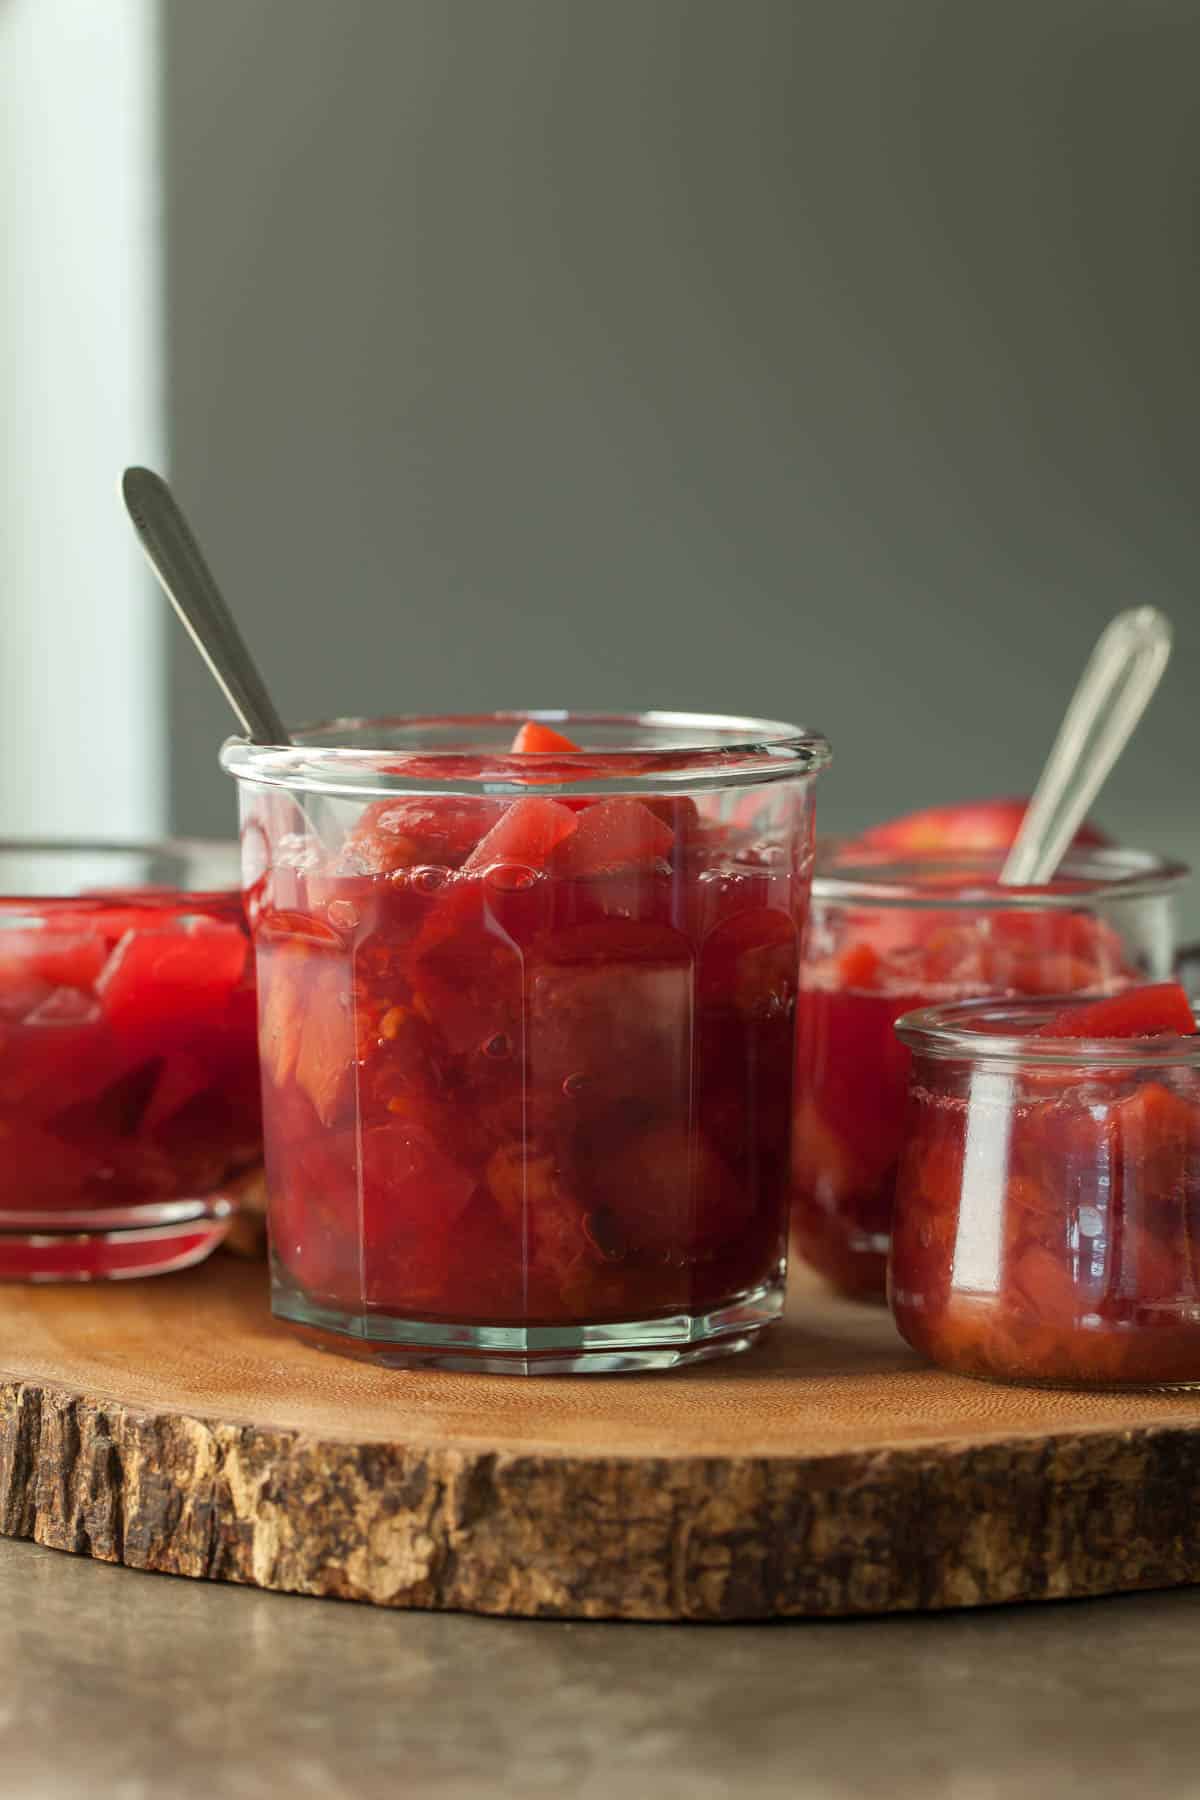 Plum Apple Compote in Jar with Spoon